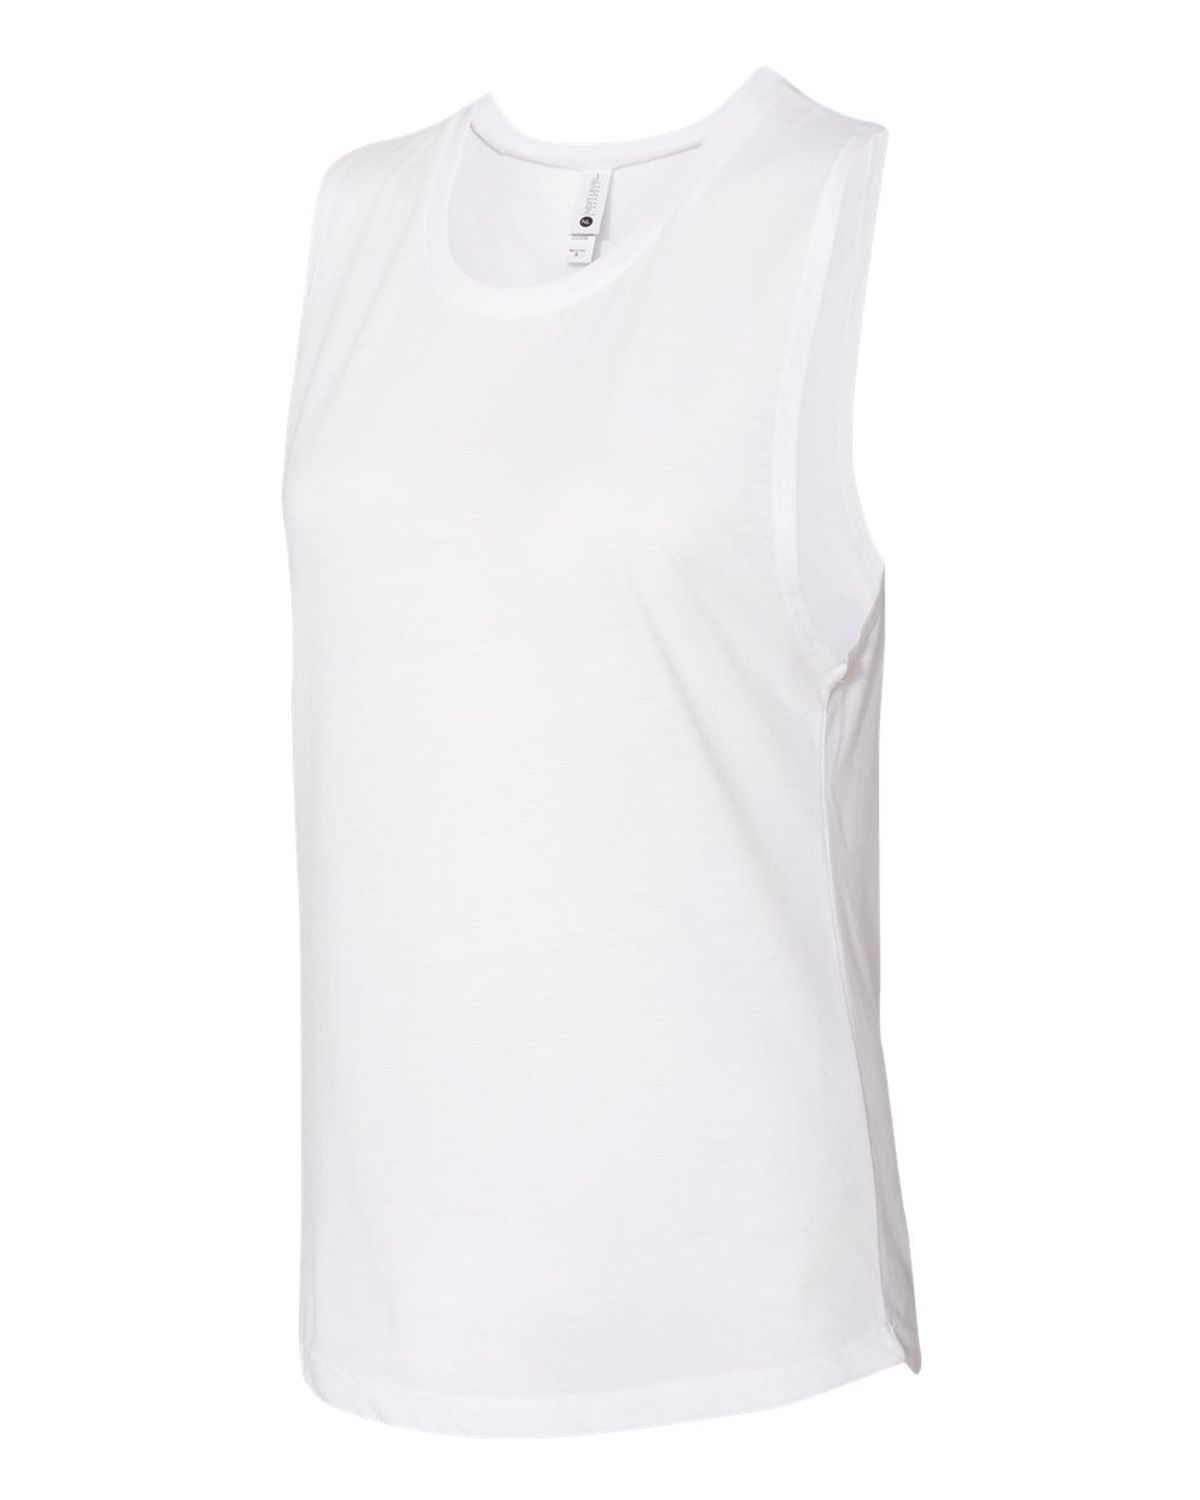 Next Level 5013 Womens Festival Muscle Tank - Free Shipping Available